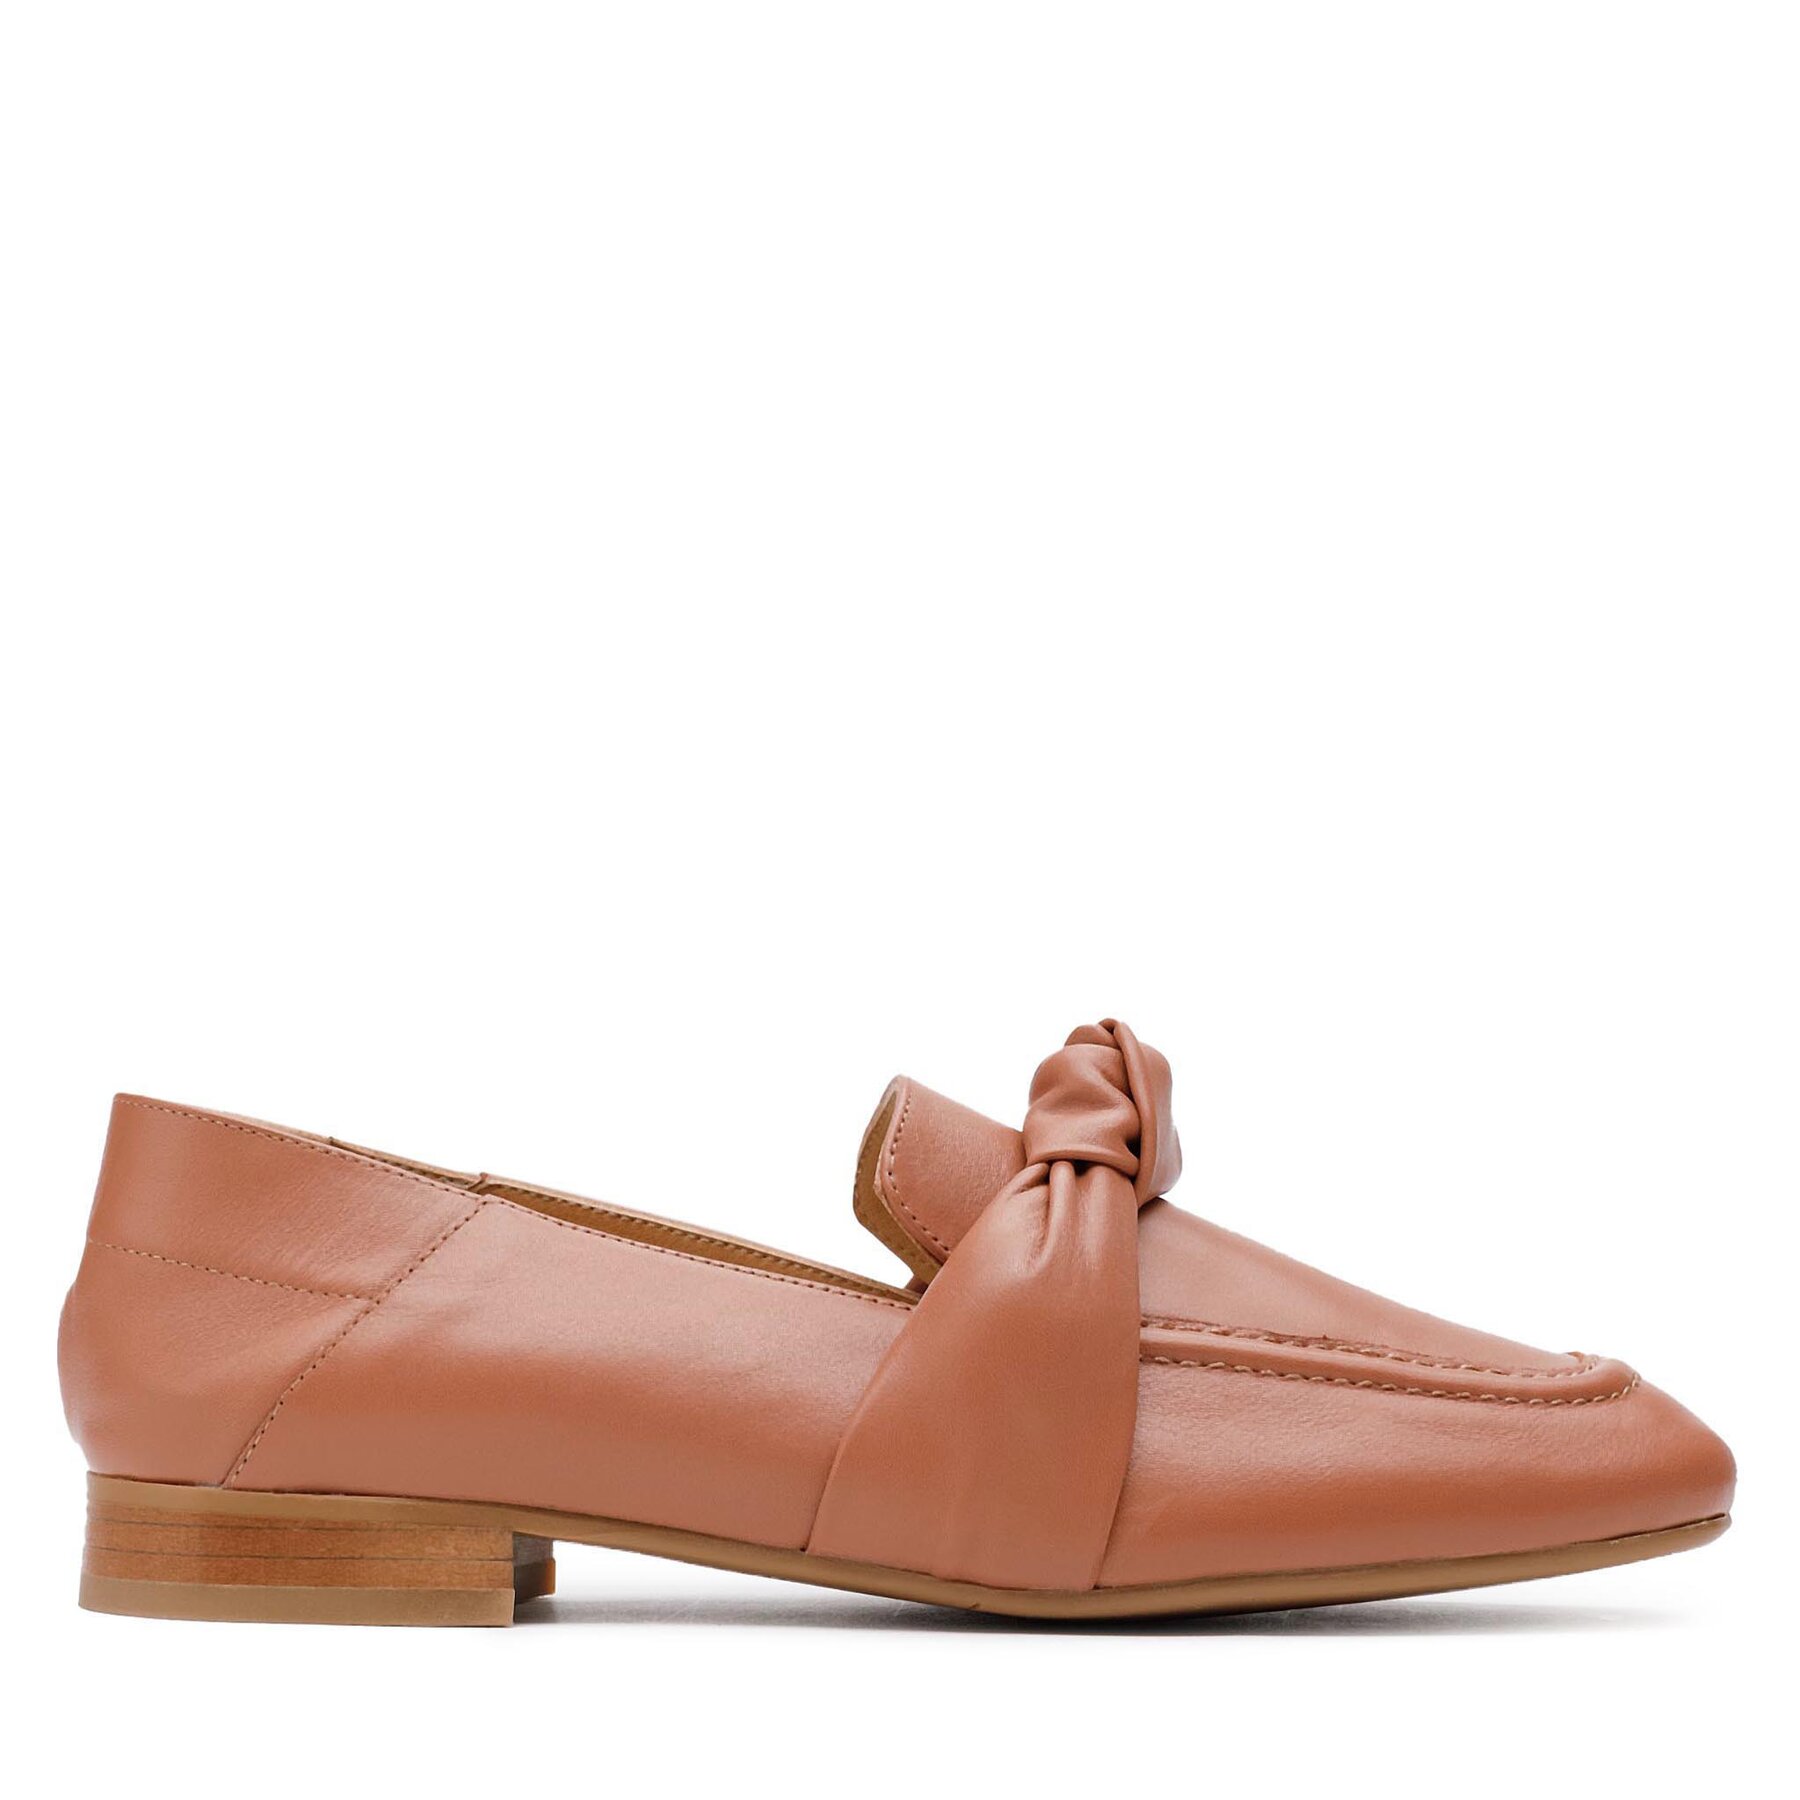 Loaferice Gino Rossi 7311 Camel